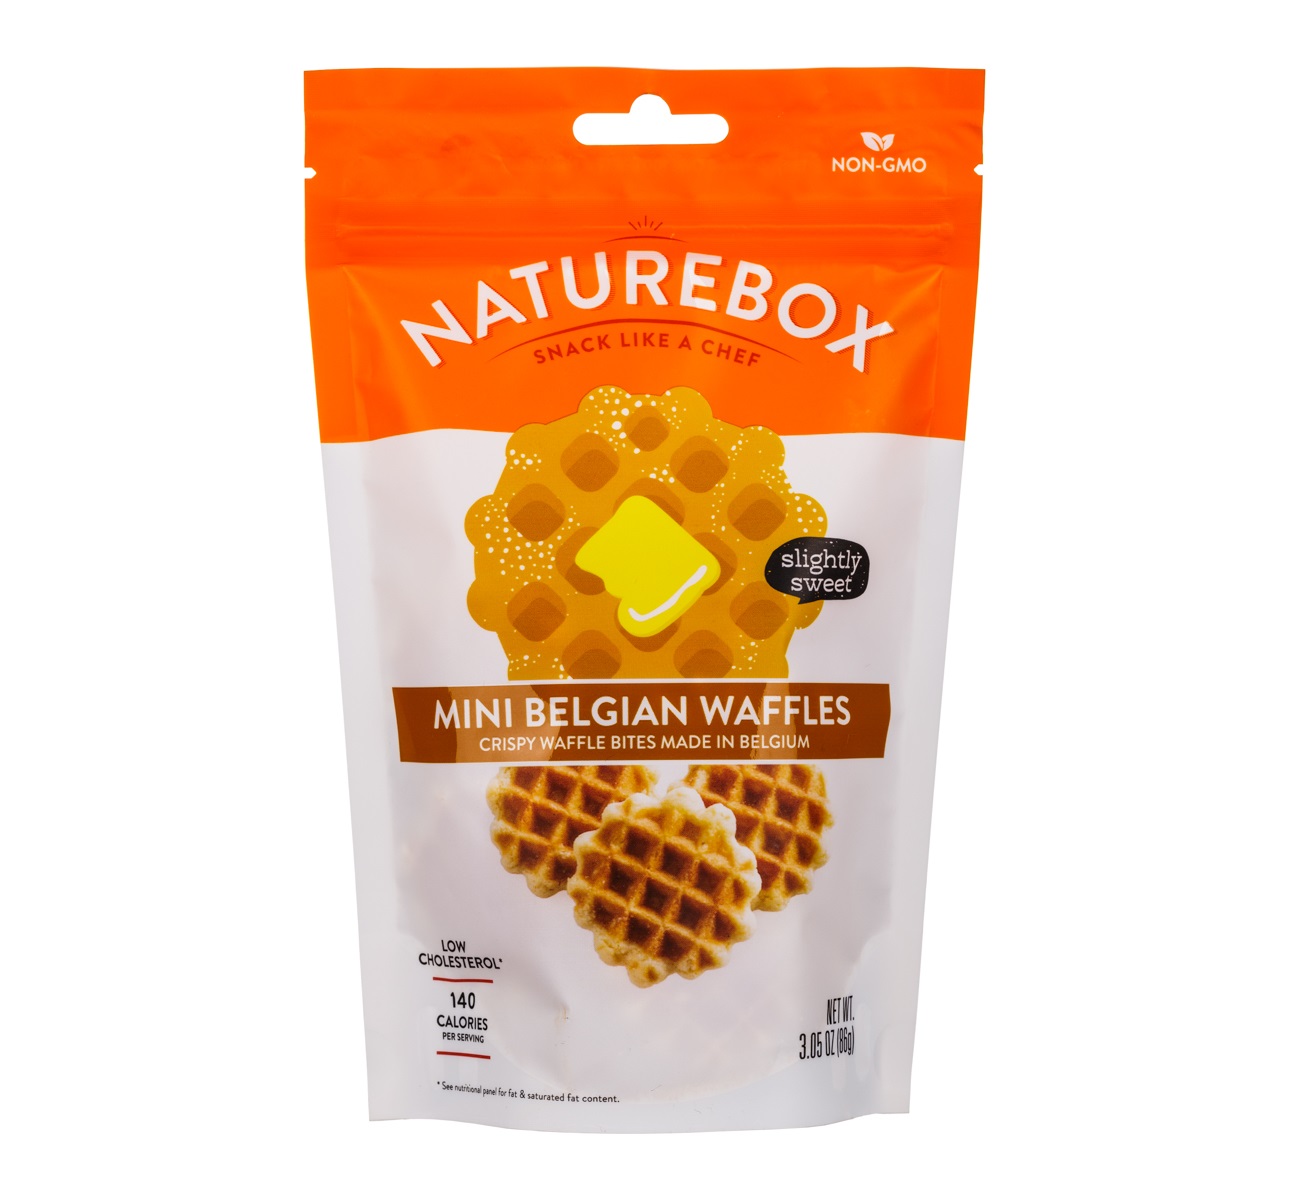 15-nature-box-nutrition-facts